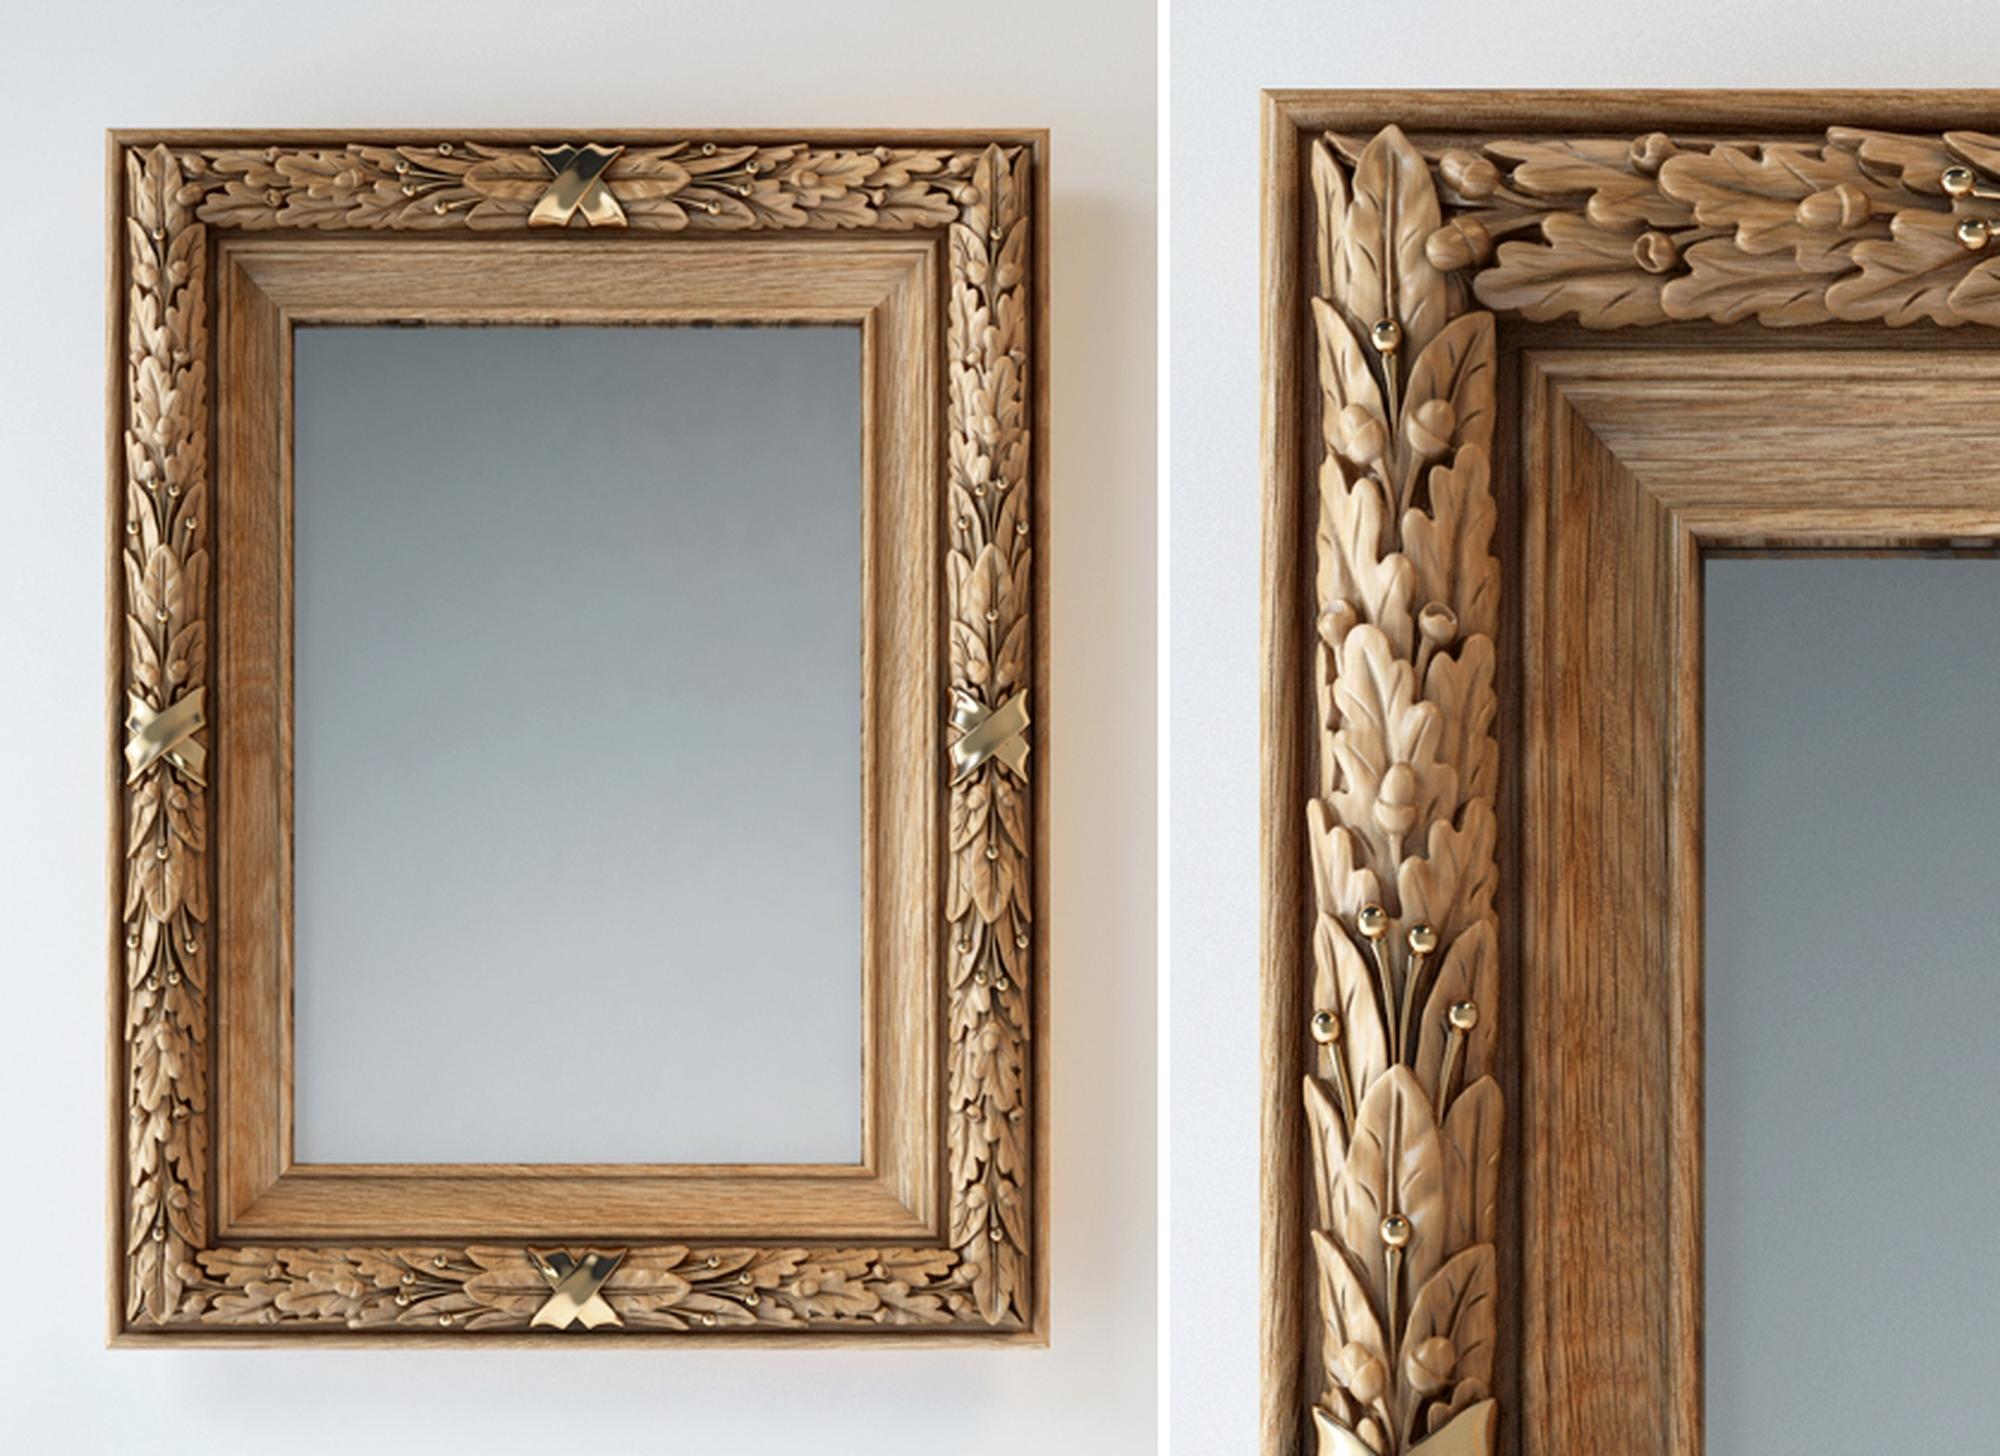 Victorian Beautiful Wall Carved Wood Mirror Frame with a pattern of oak and laurel leaves For Sale